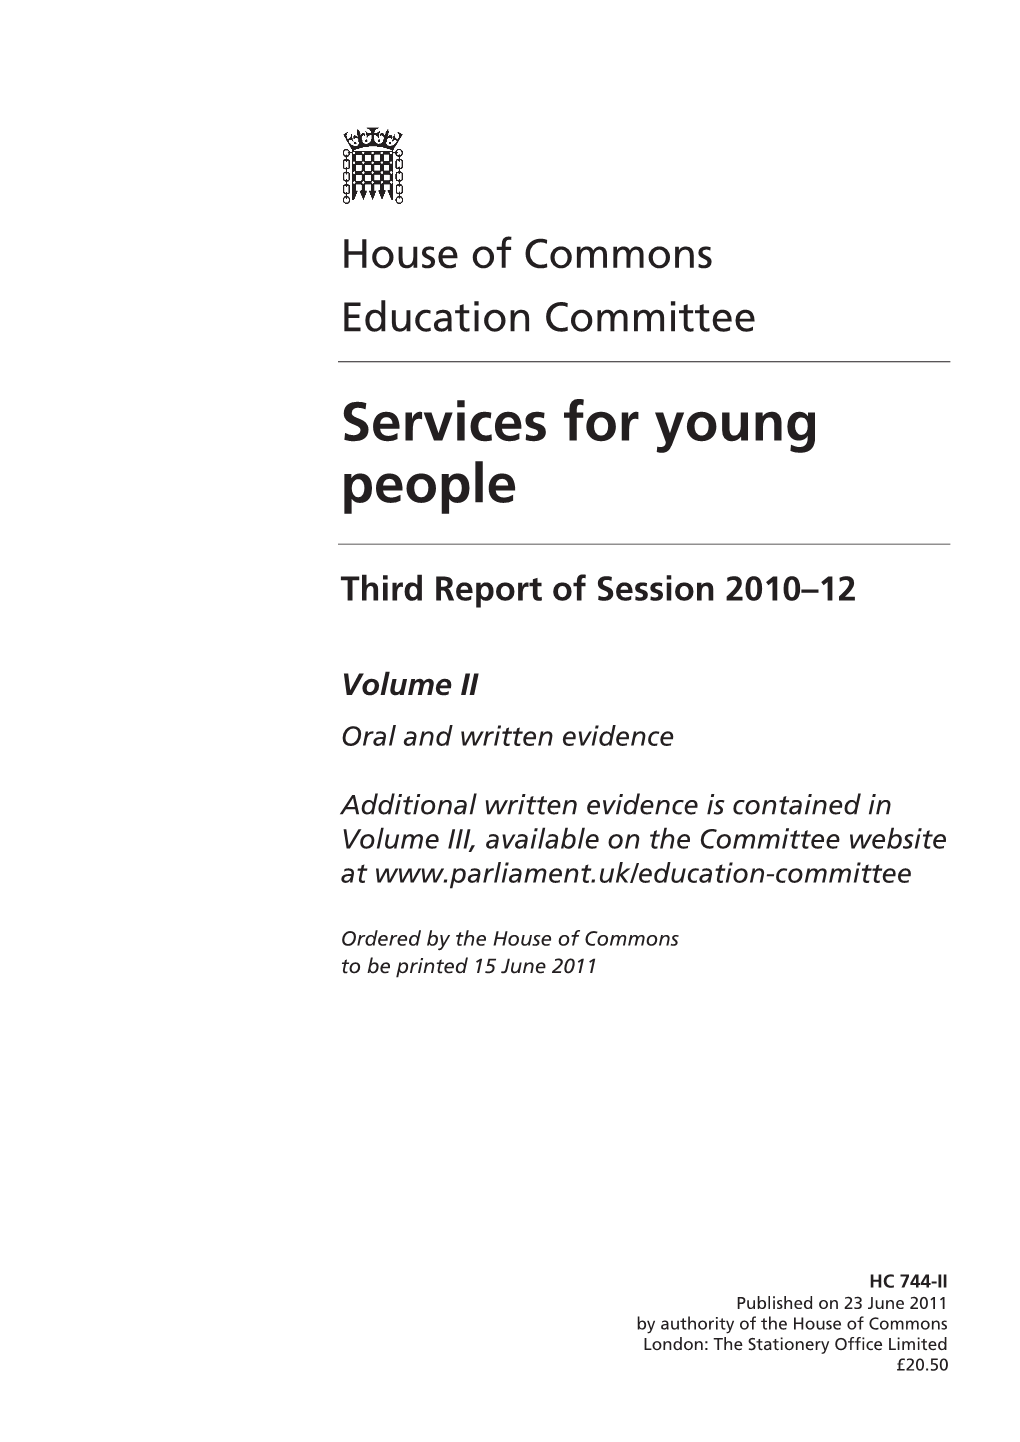 Services for Young People